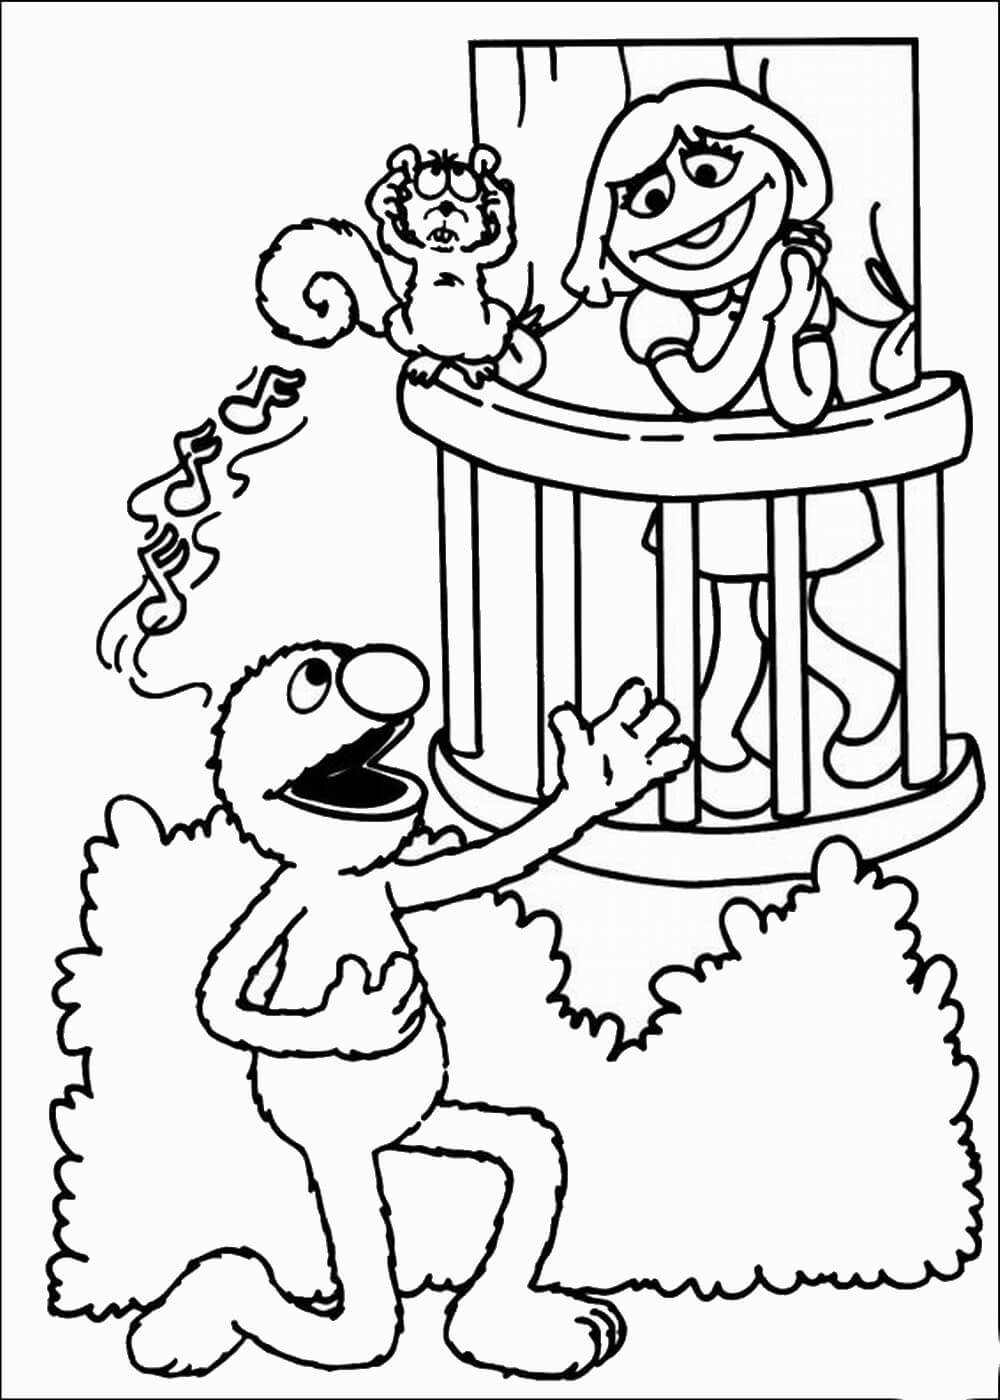 Grovers Serenade Sesame Street Coloring Pages